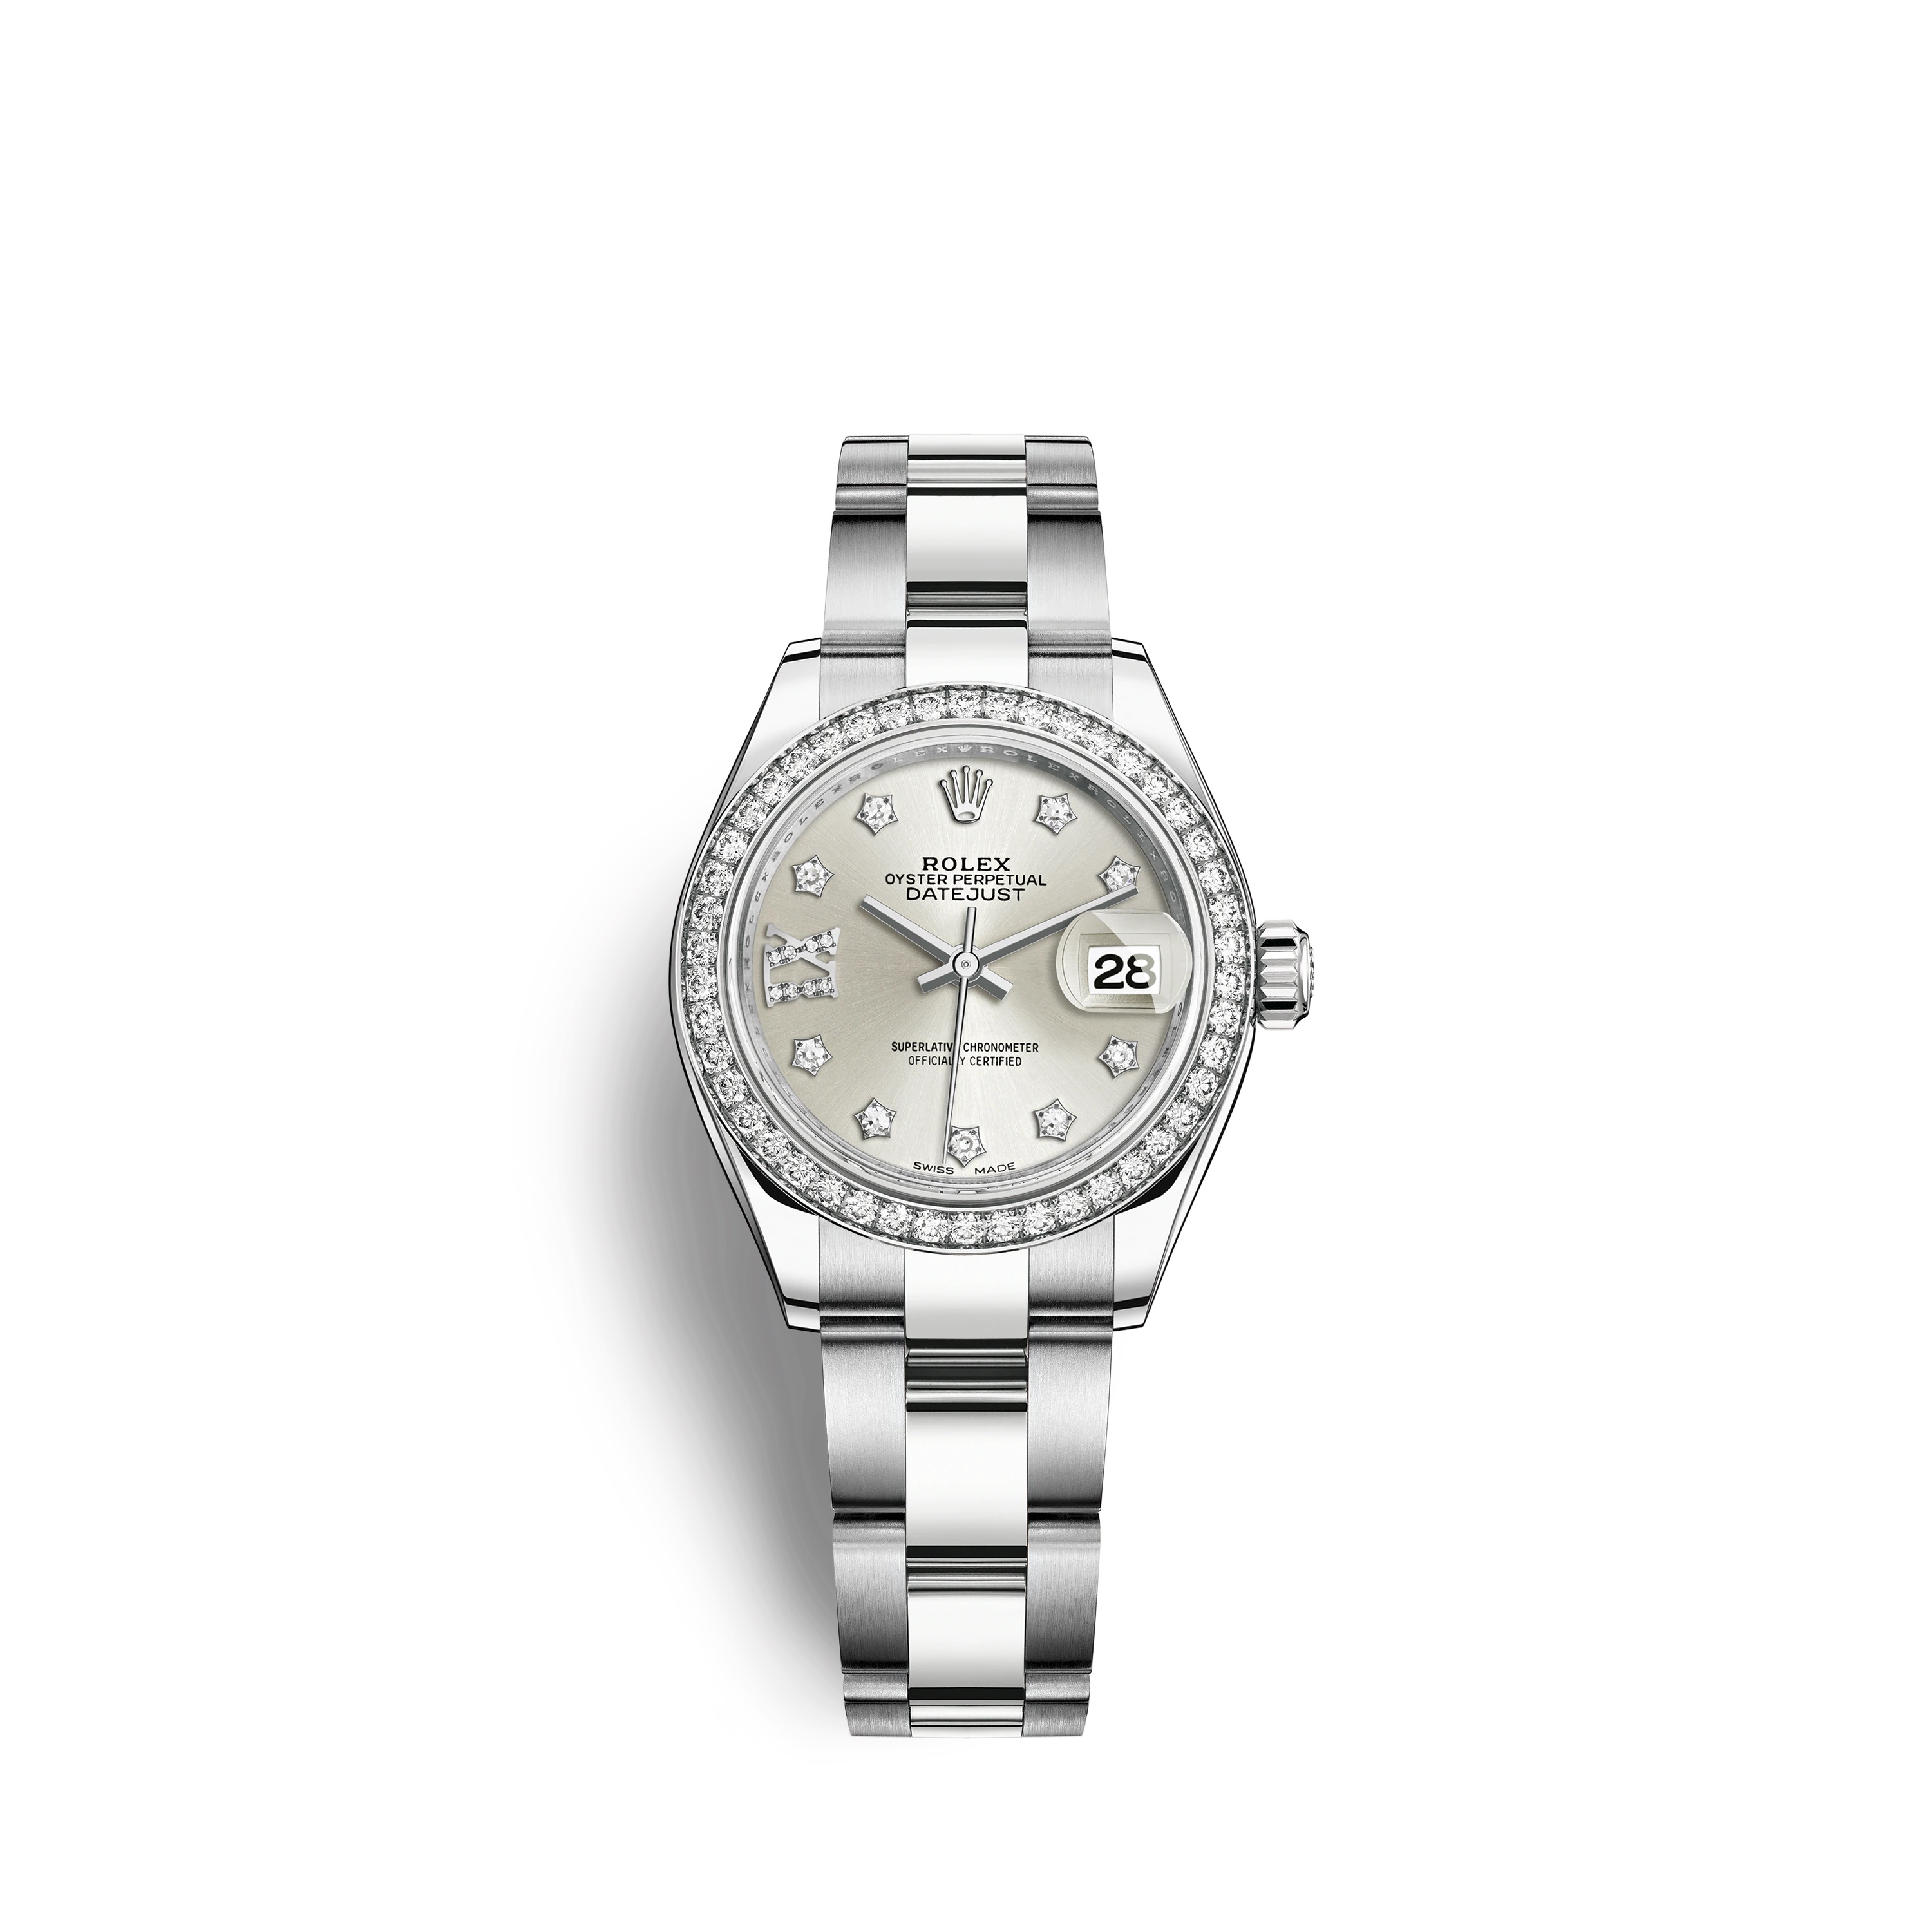 Lady-Datejust 28 279384RBR White Gold & Stainless Steel Watch (Silver Set with Diamonds)